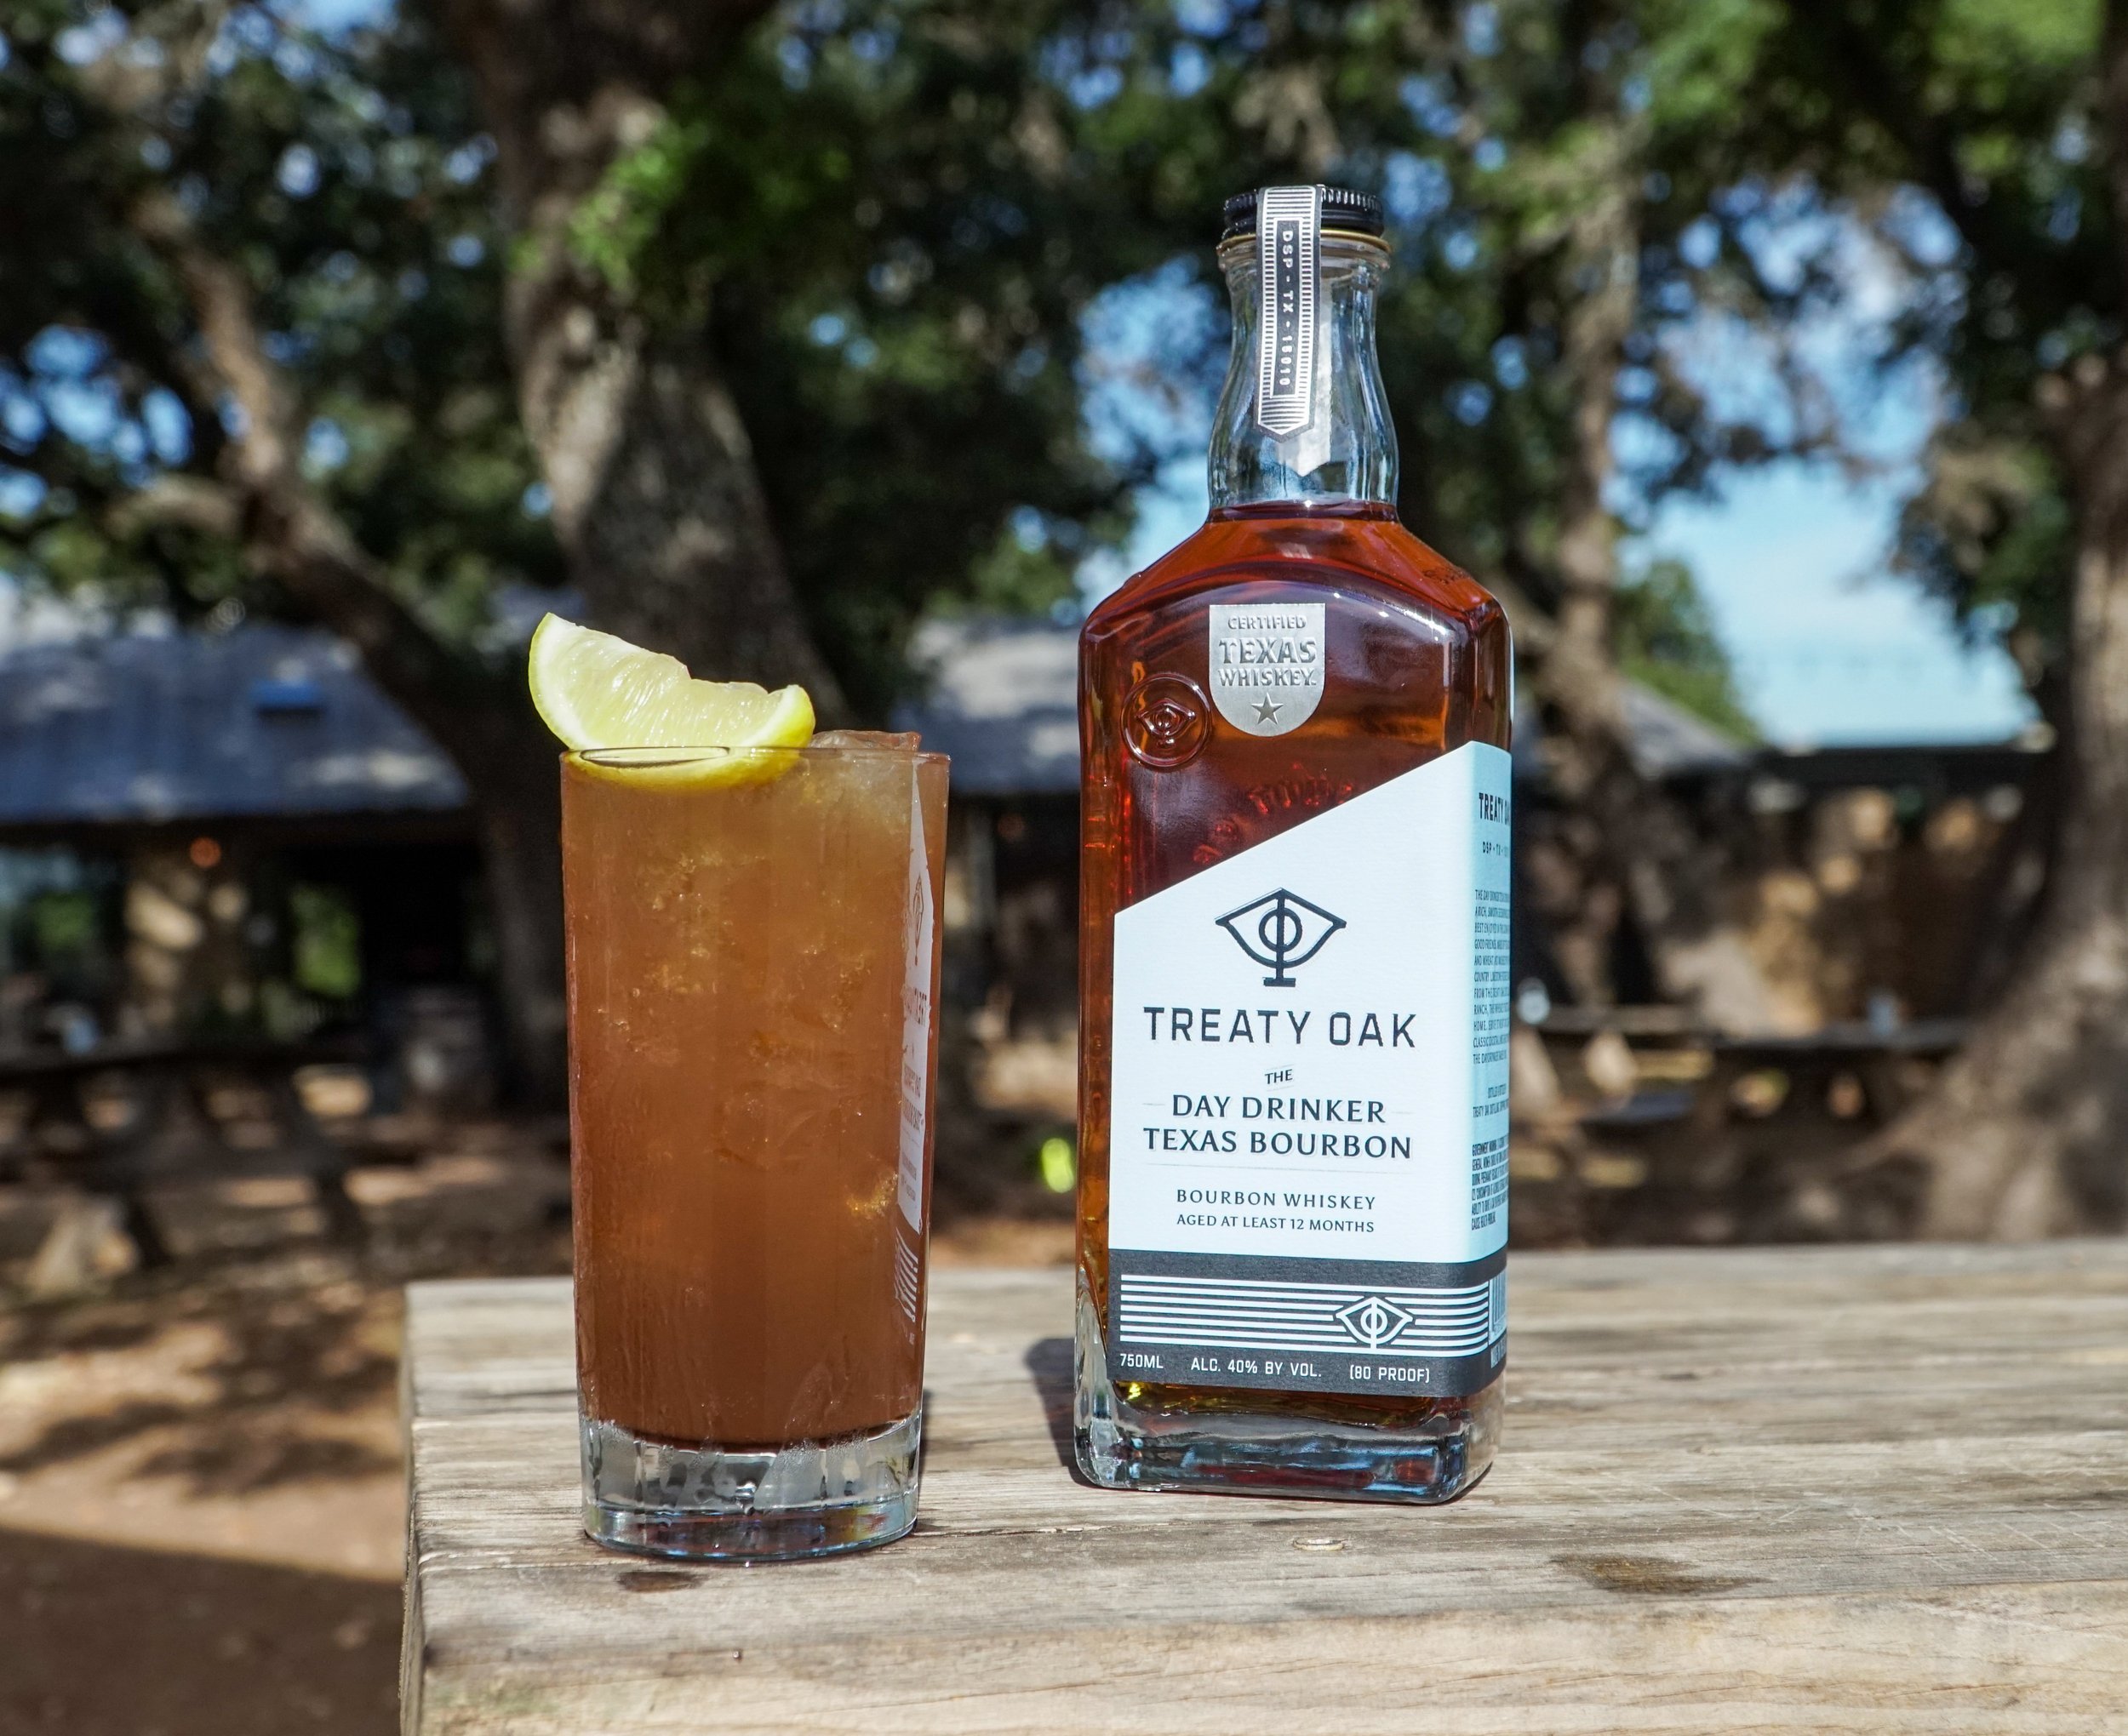 Bottle of Treaty Oak Day Drinker Texas Bourbon and a cocktail next to it on a table